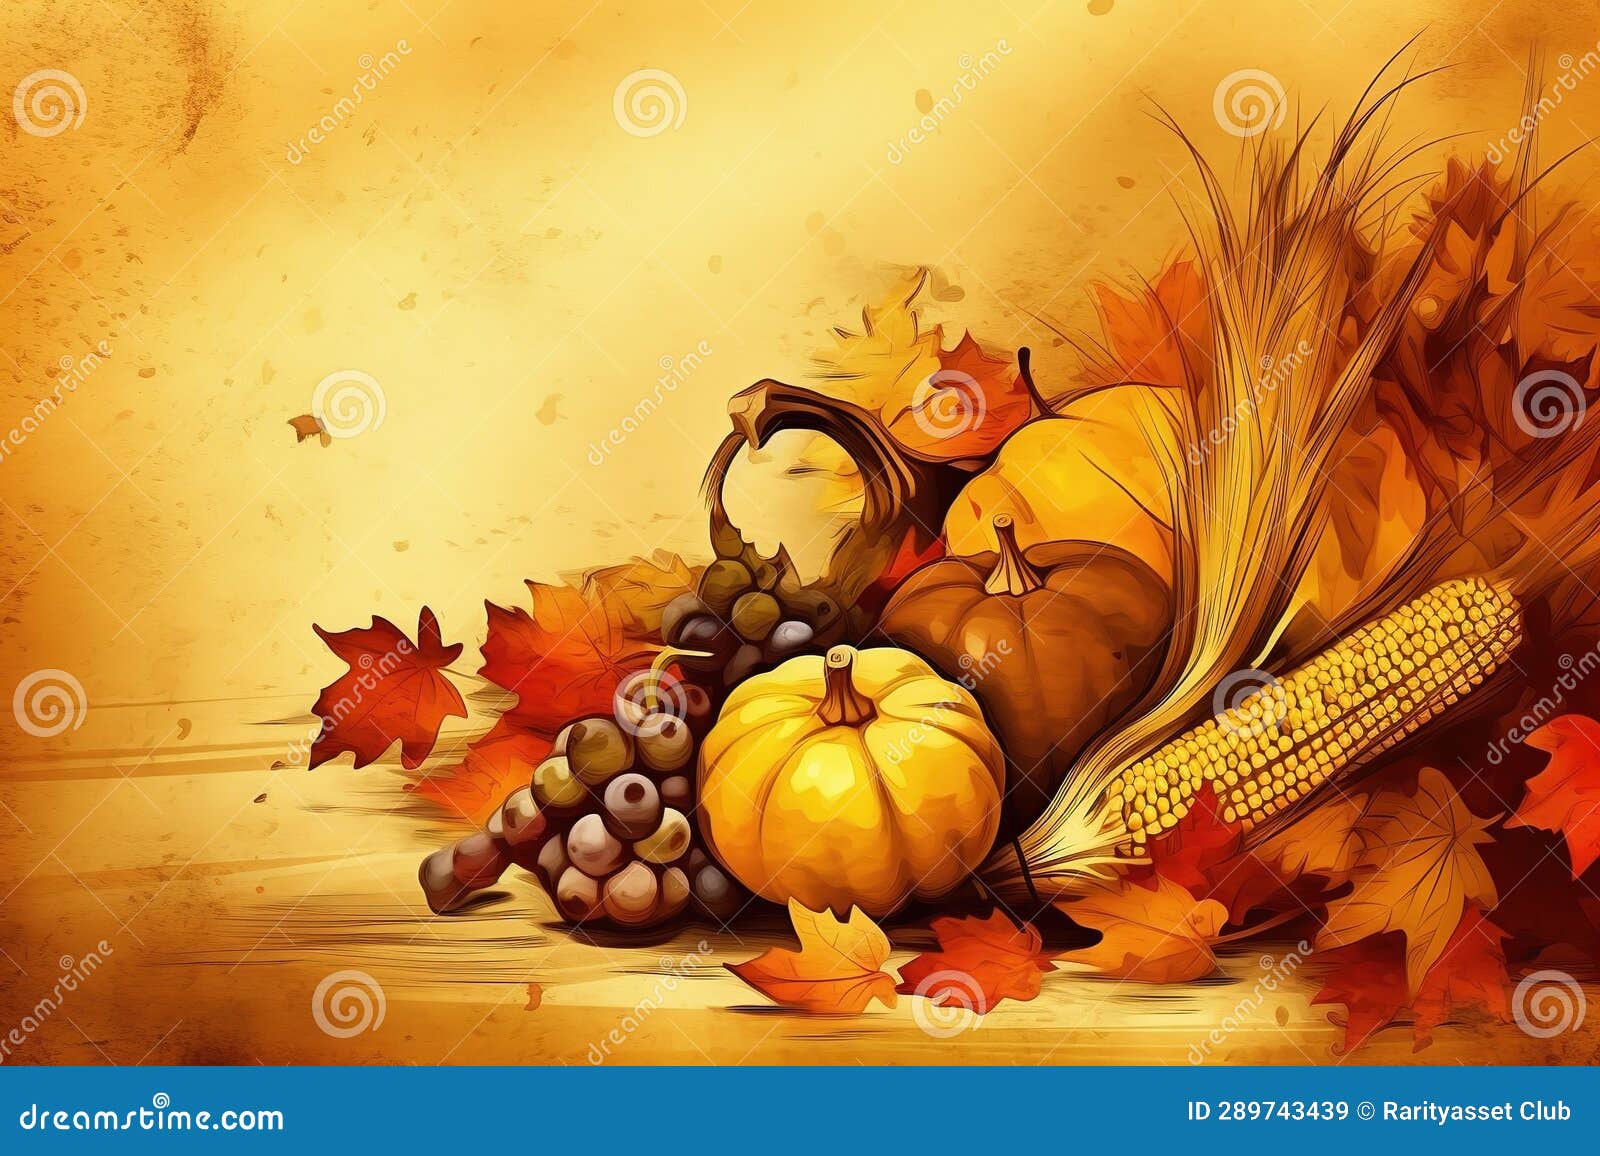 Happy Thanksgiving. Thanksgiving Pumpkins and Autumn Leaves ...